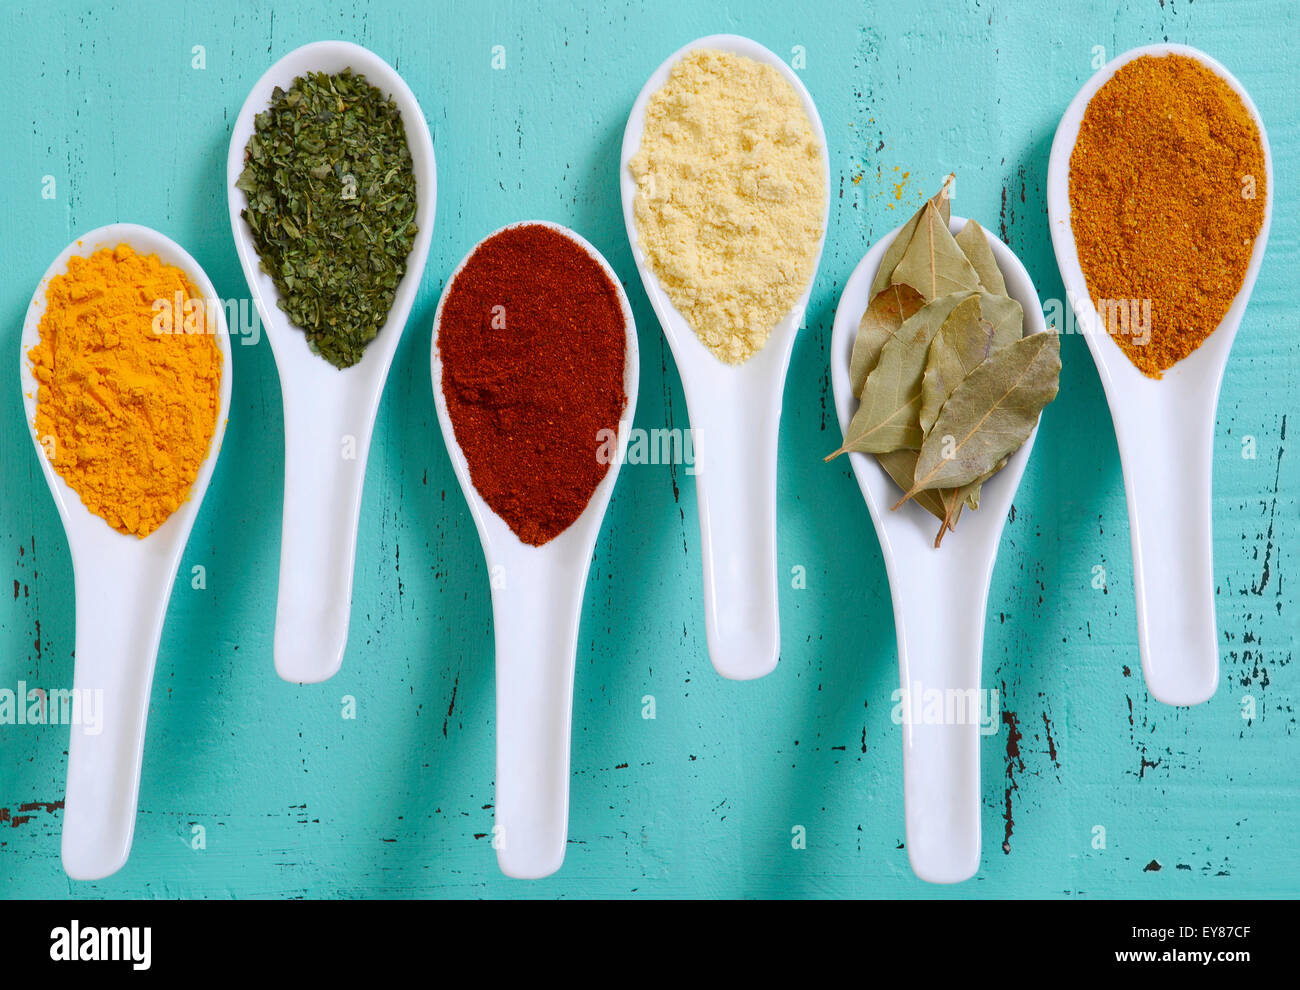 Colorful cooking spices and herbs in white spoons on vintage aqua blue table overhead. Stock Photo